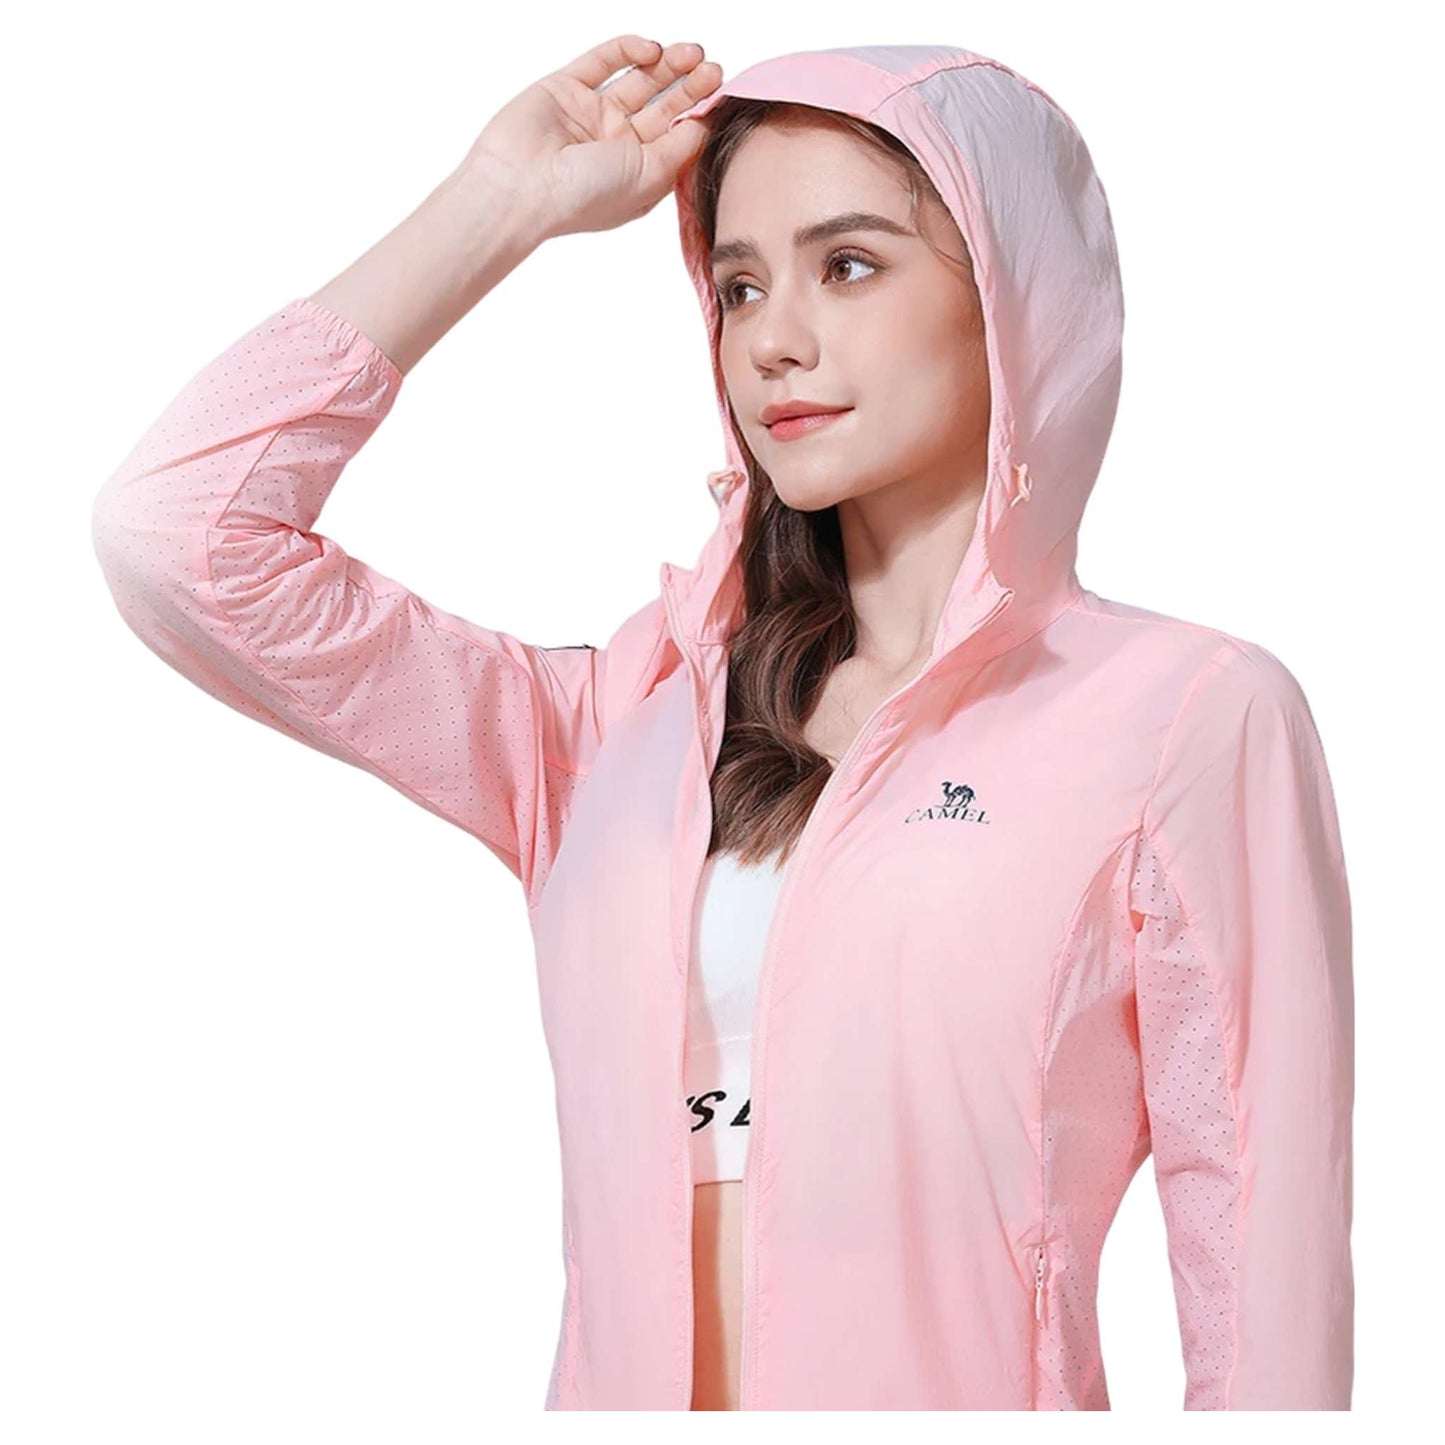 Ethereal Trailblazer Women's Hiking Jacket - Breathable & Waterproof with Sun Protection